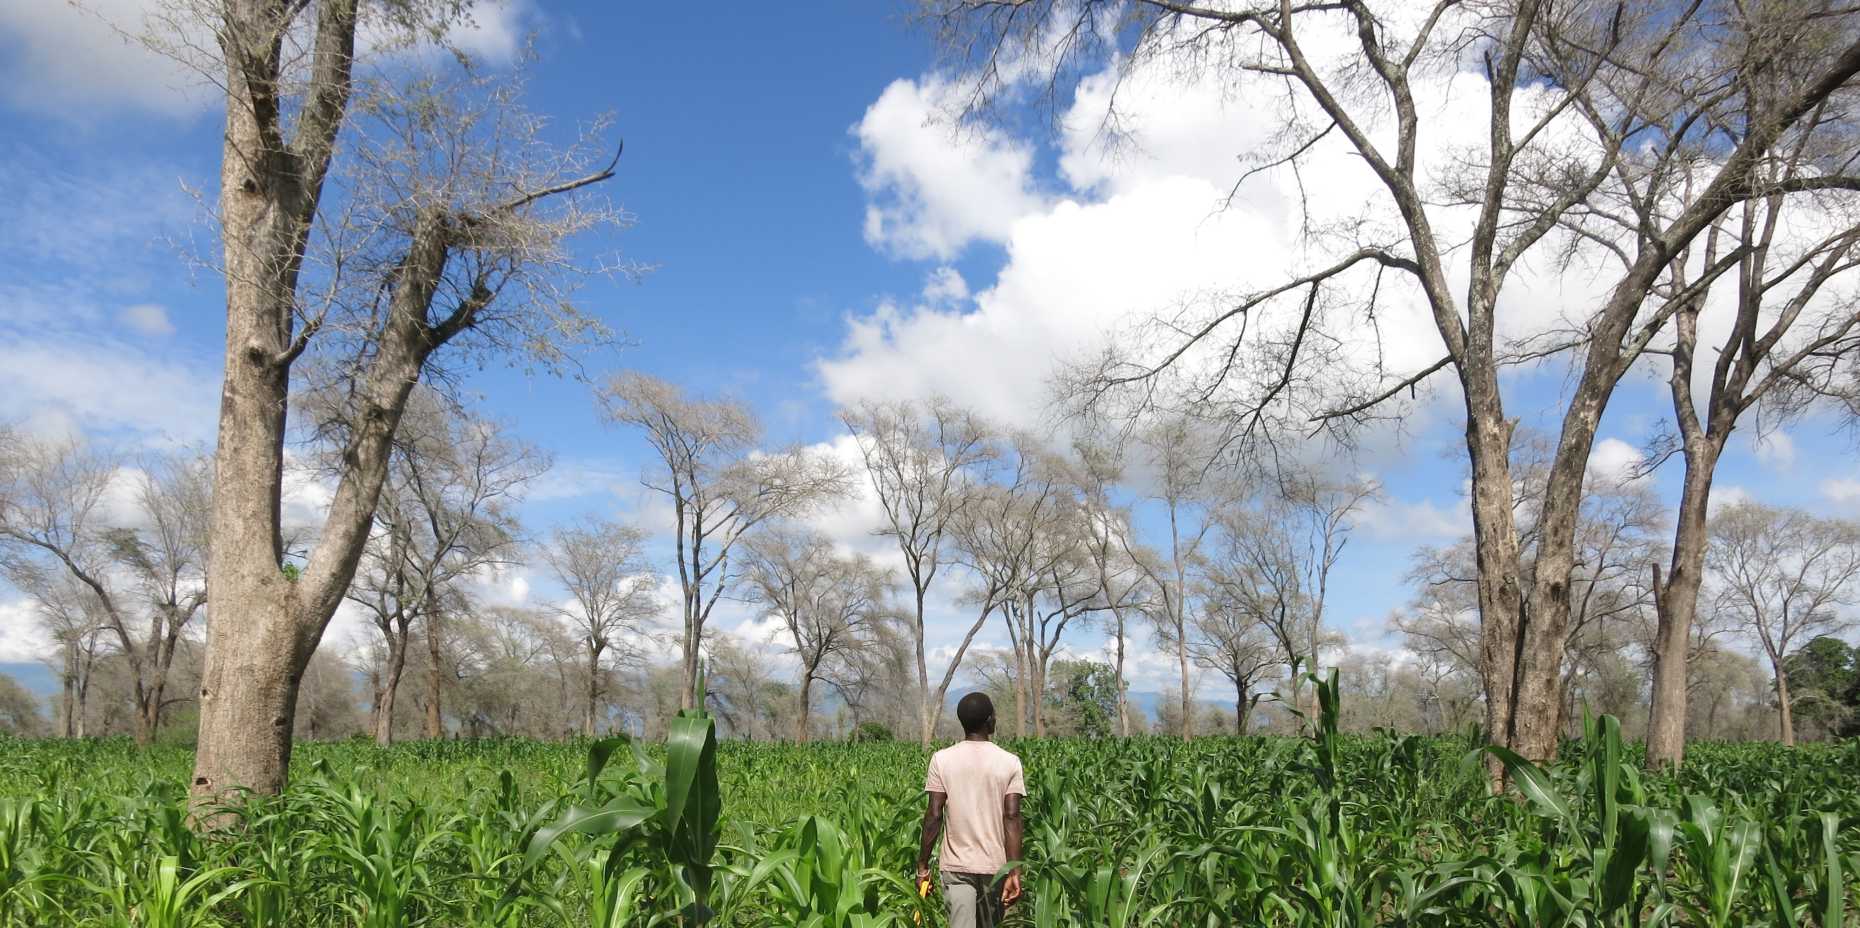 Maize fields in central Malawi (Image: Janina Dierks)